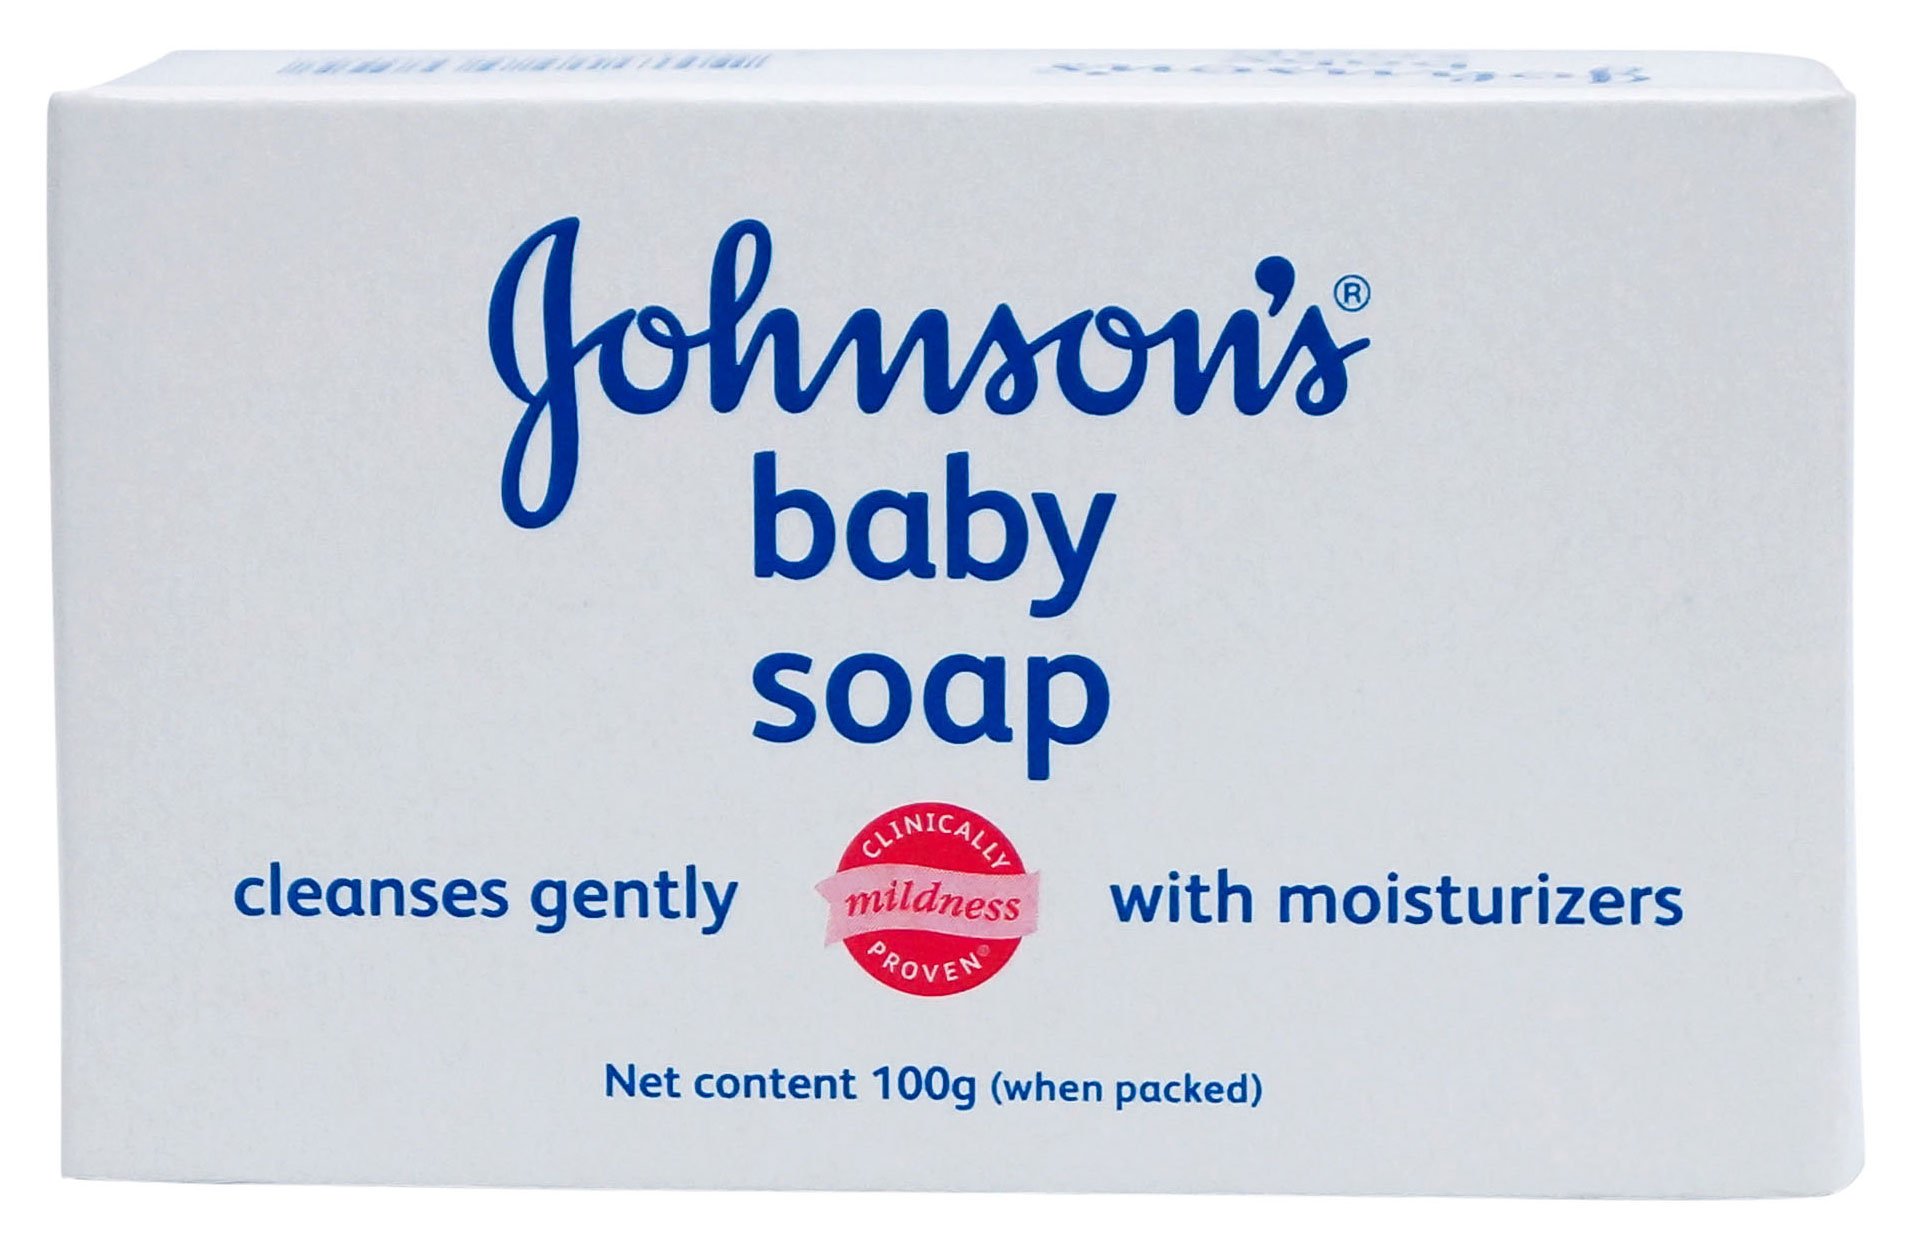 baby soap is good for adults